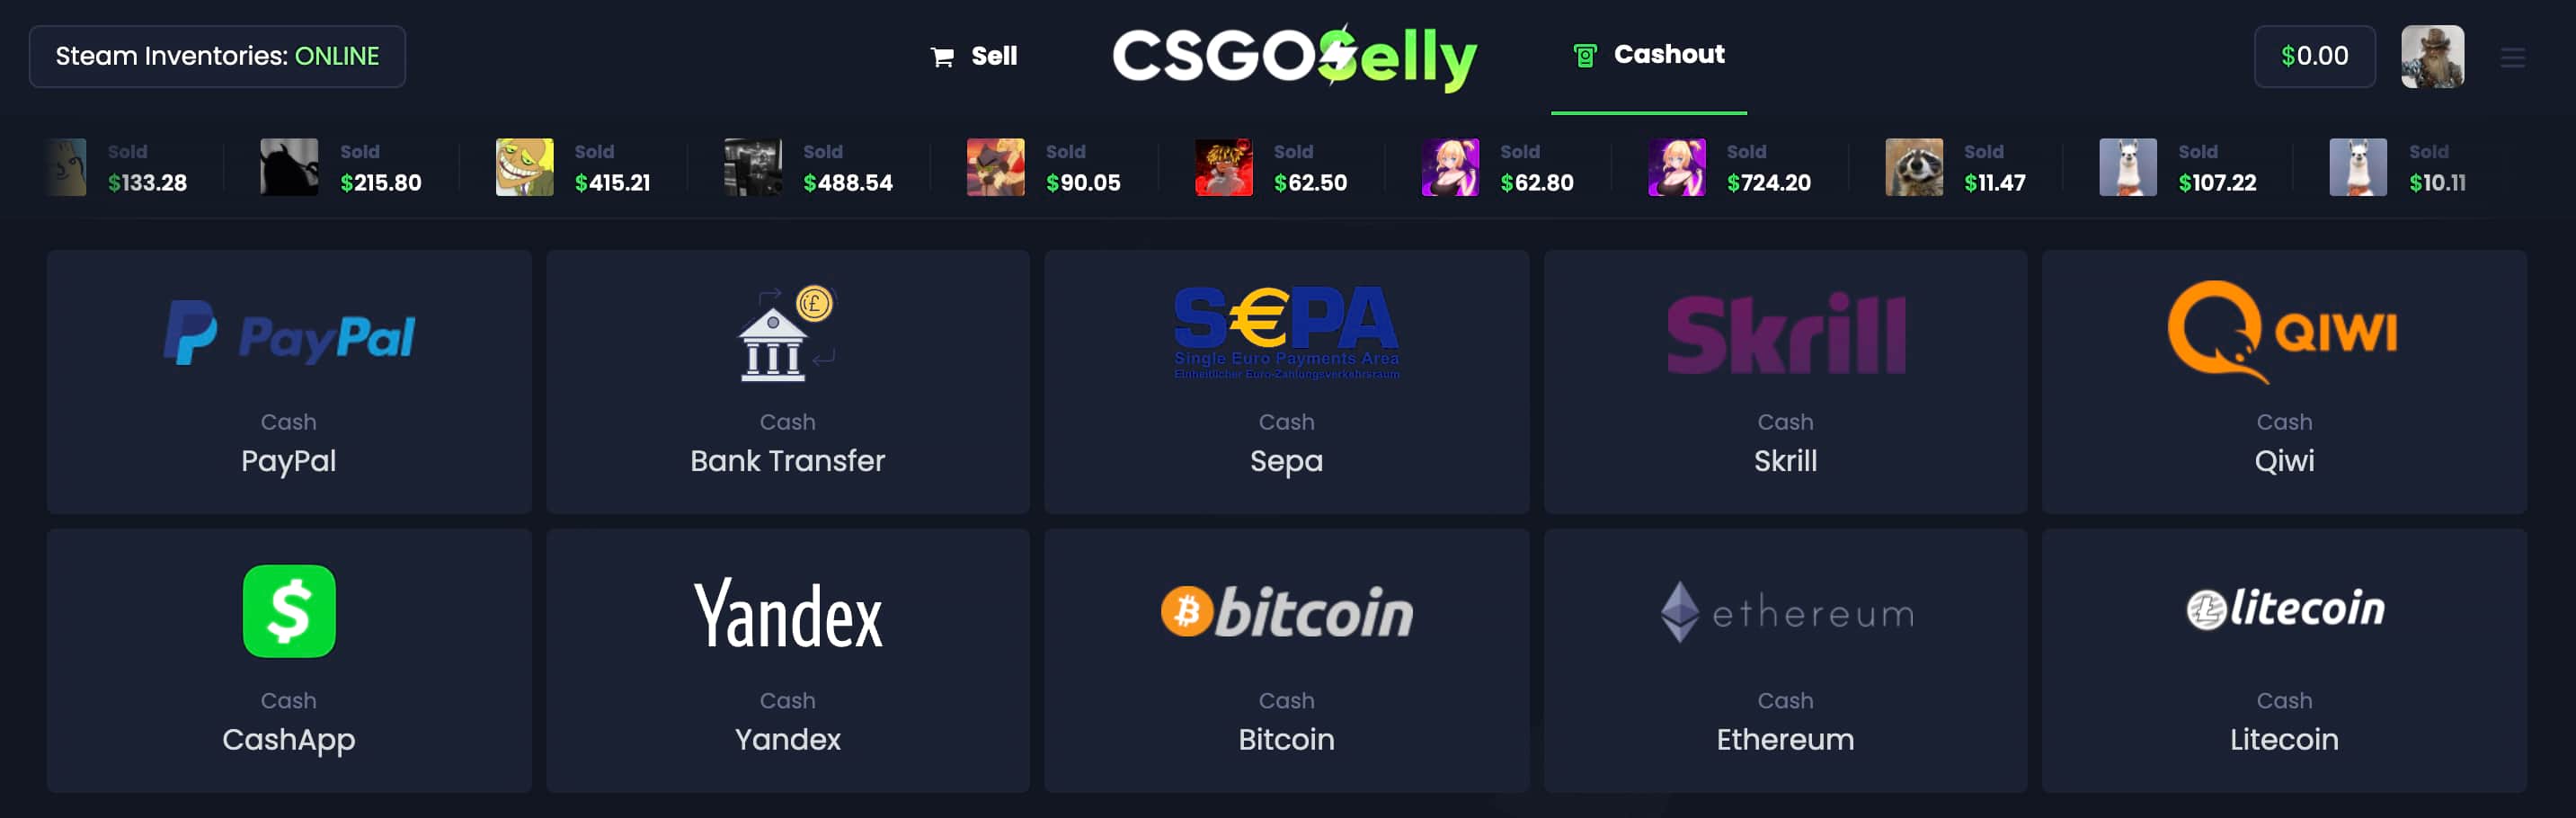 csgoselly-support